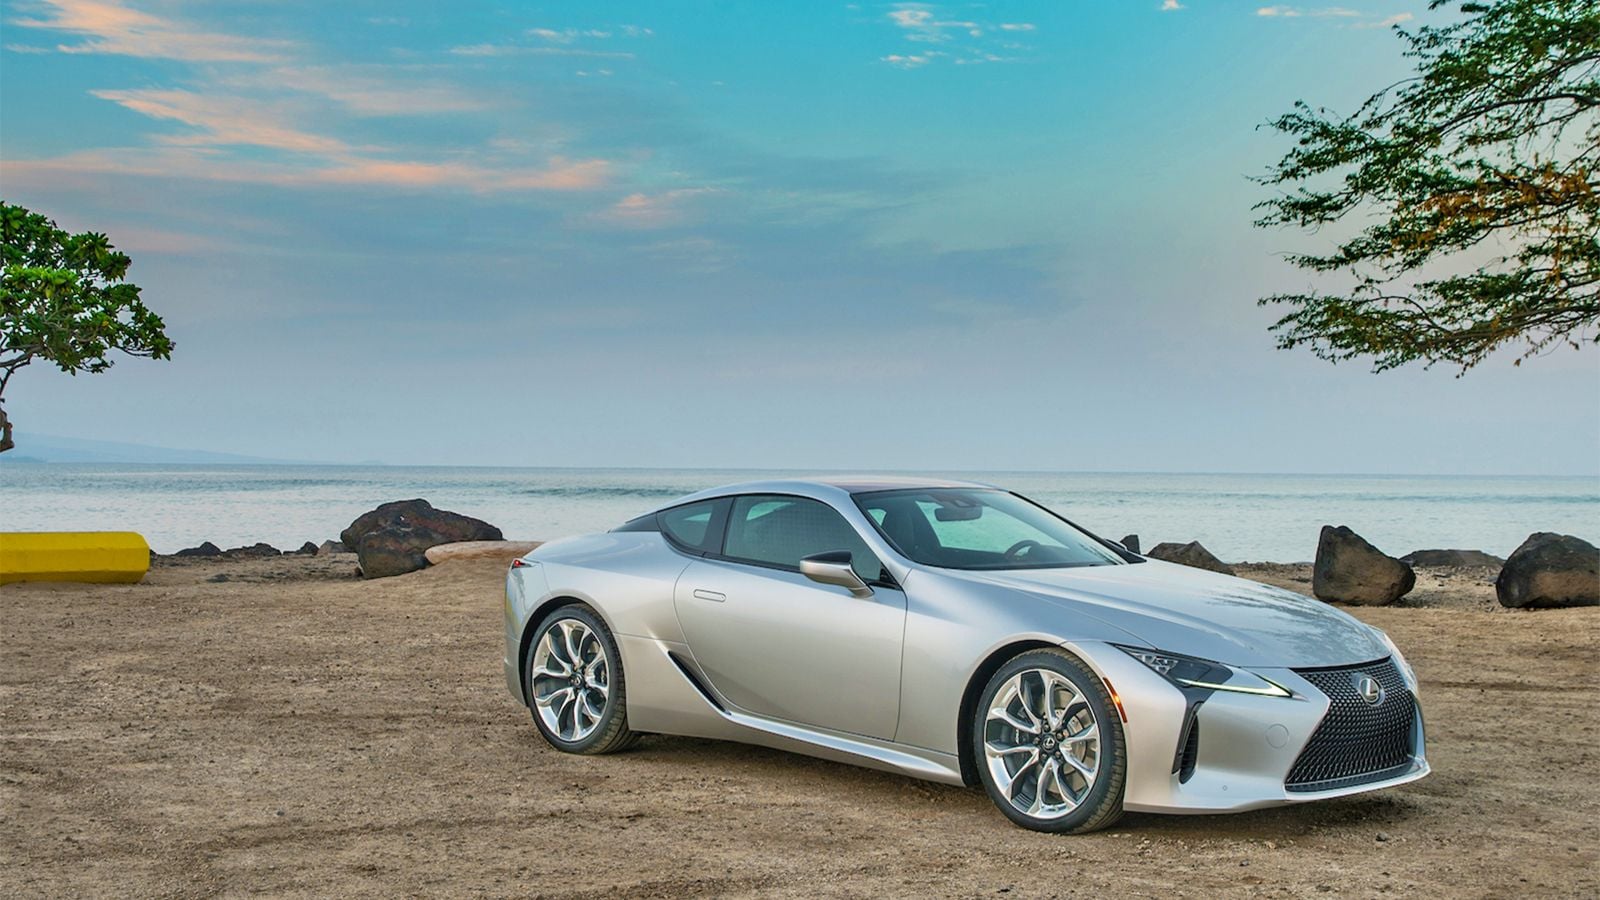 Lexus Has a Credit Card and Here's Why It's Different | Clublexus